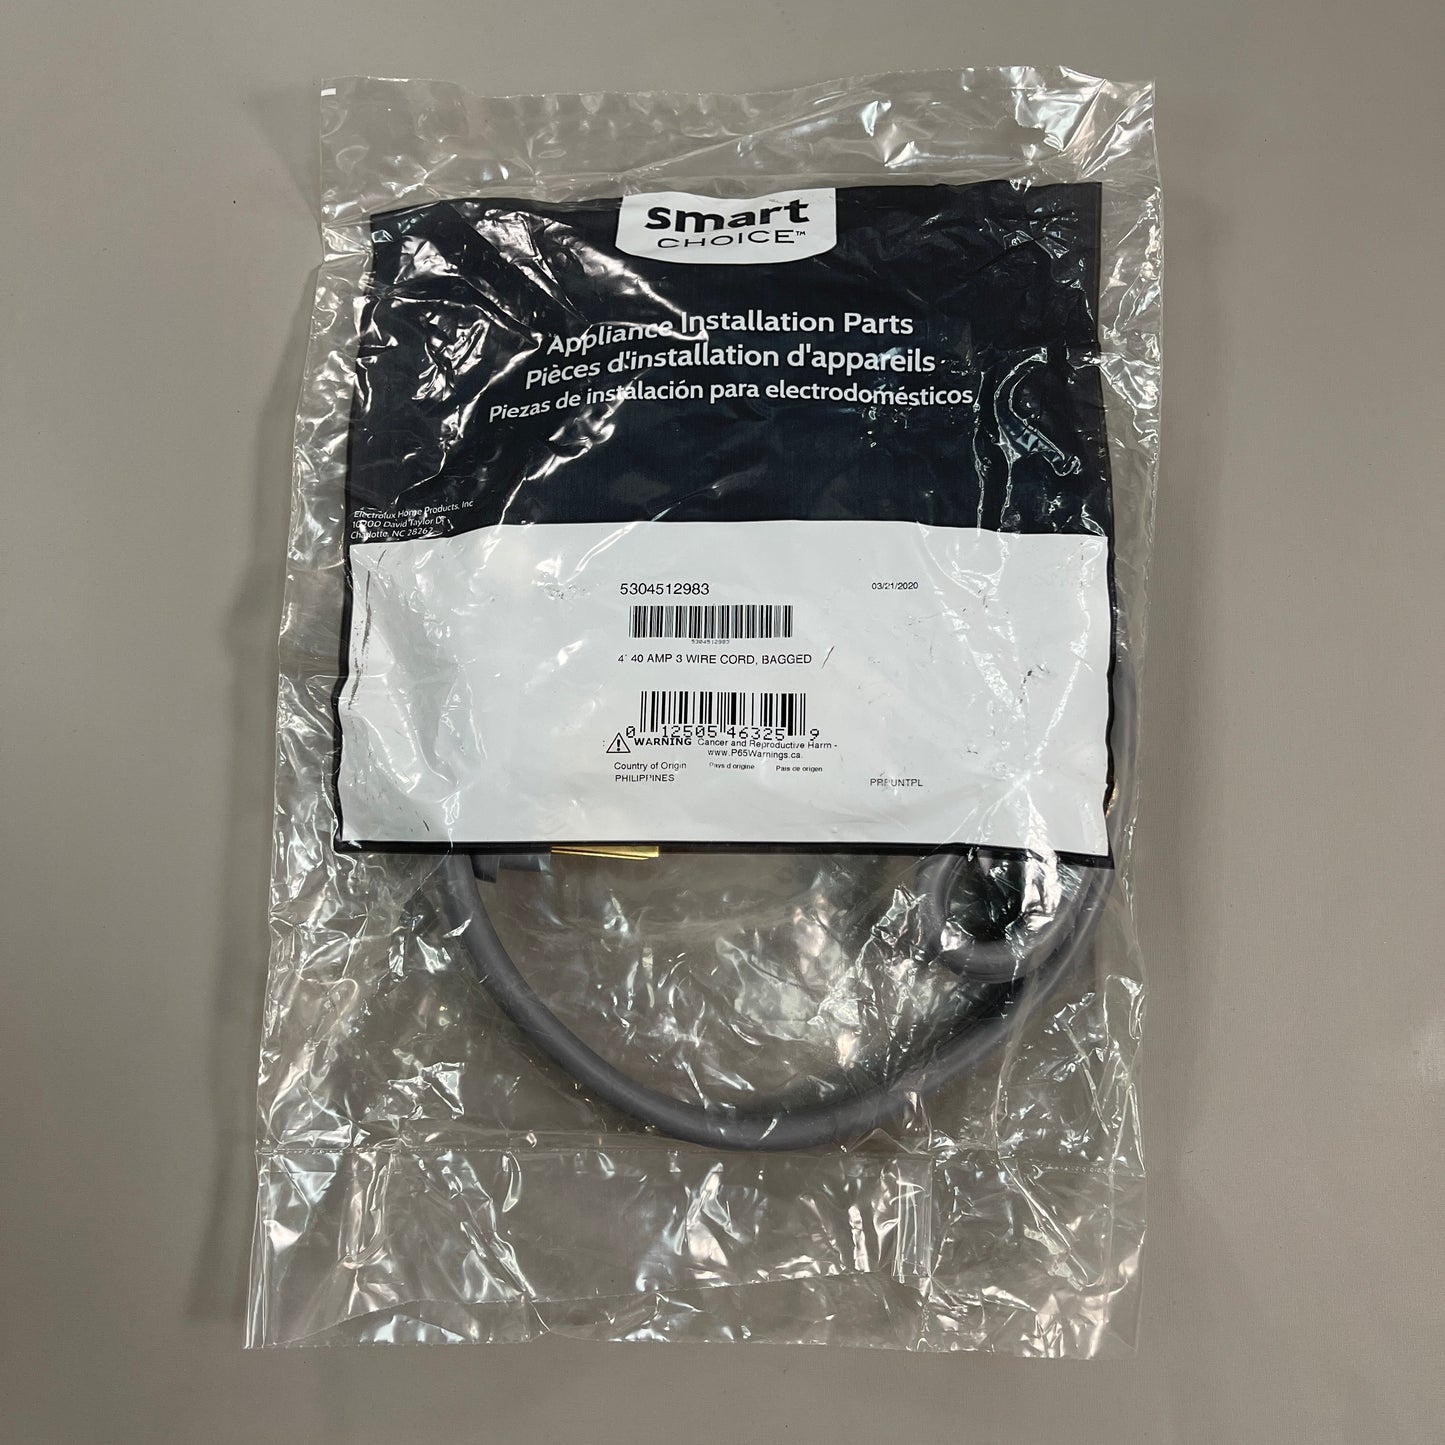 ELECTROLUX Smart Choice (4 ft) 40 AMP 3 Wire Gray Cord 5304512983 (New)